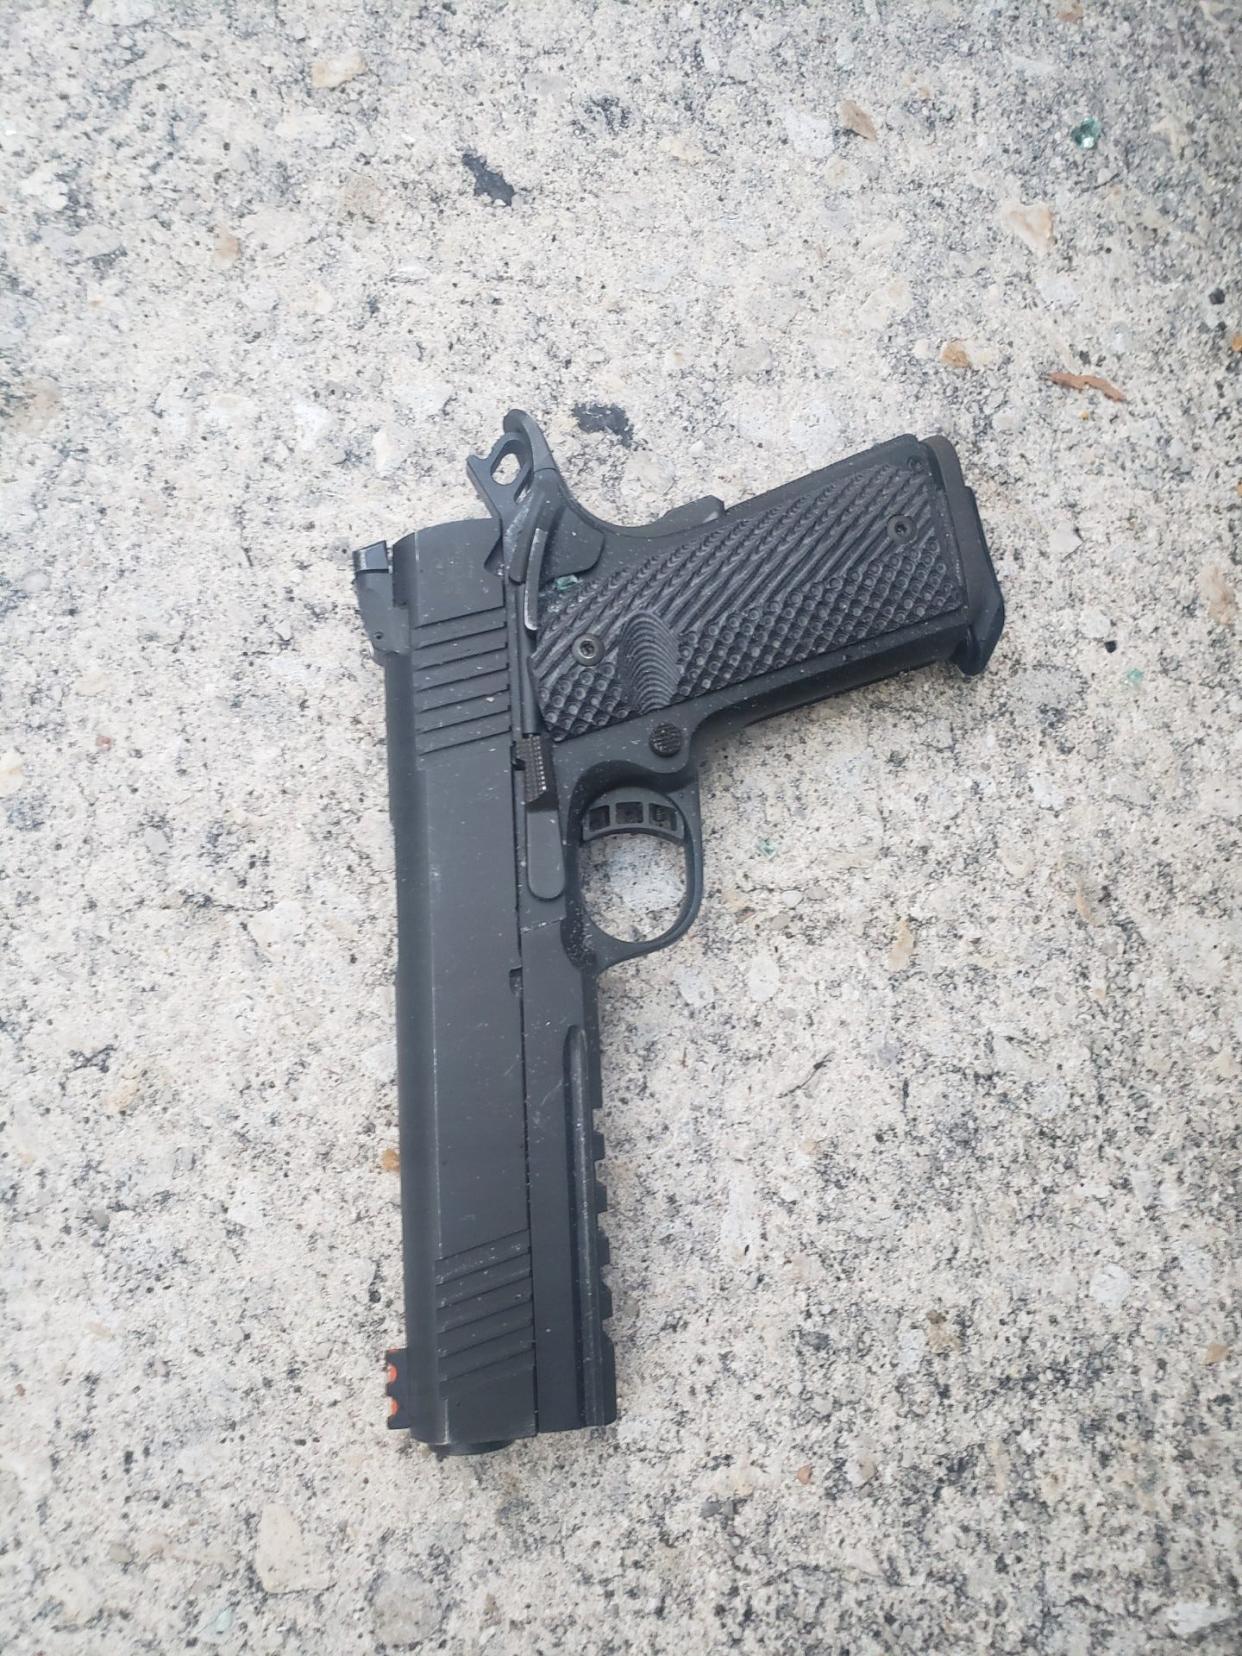 This is the gun that the Jacksonville Sheriff's Office said Zonchez Prince displayed when two officers shot and killed him in Orange Park on Friday.